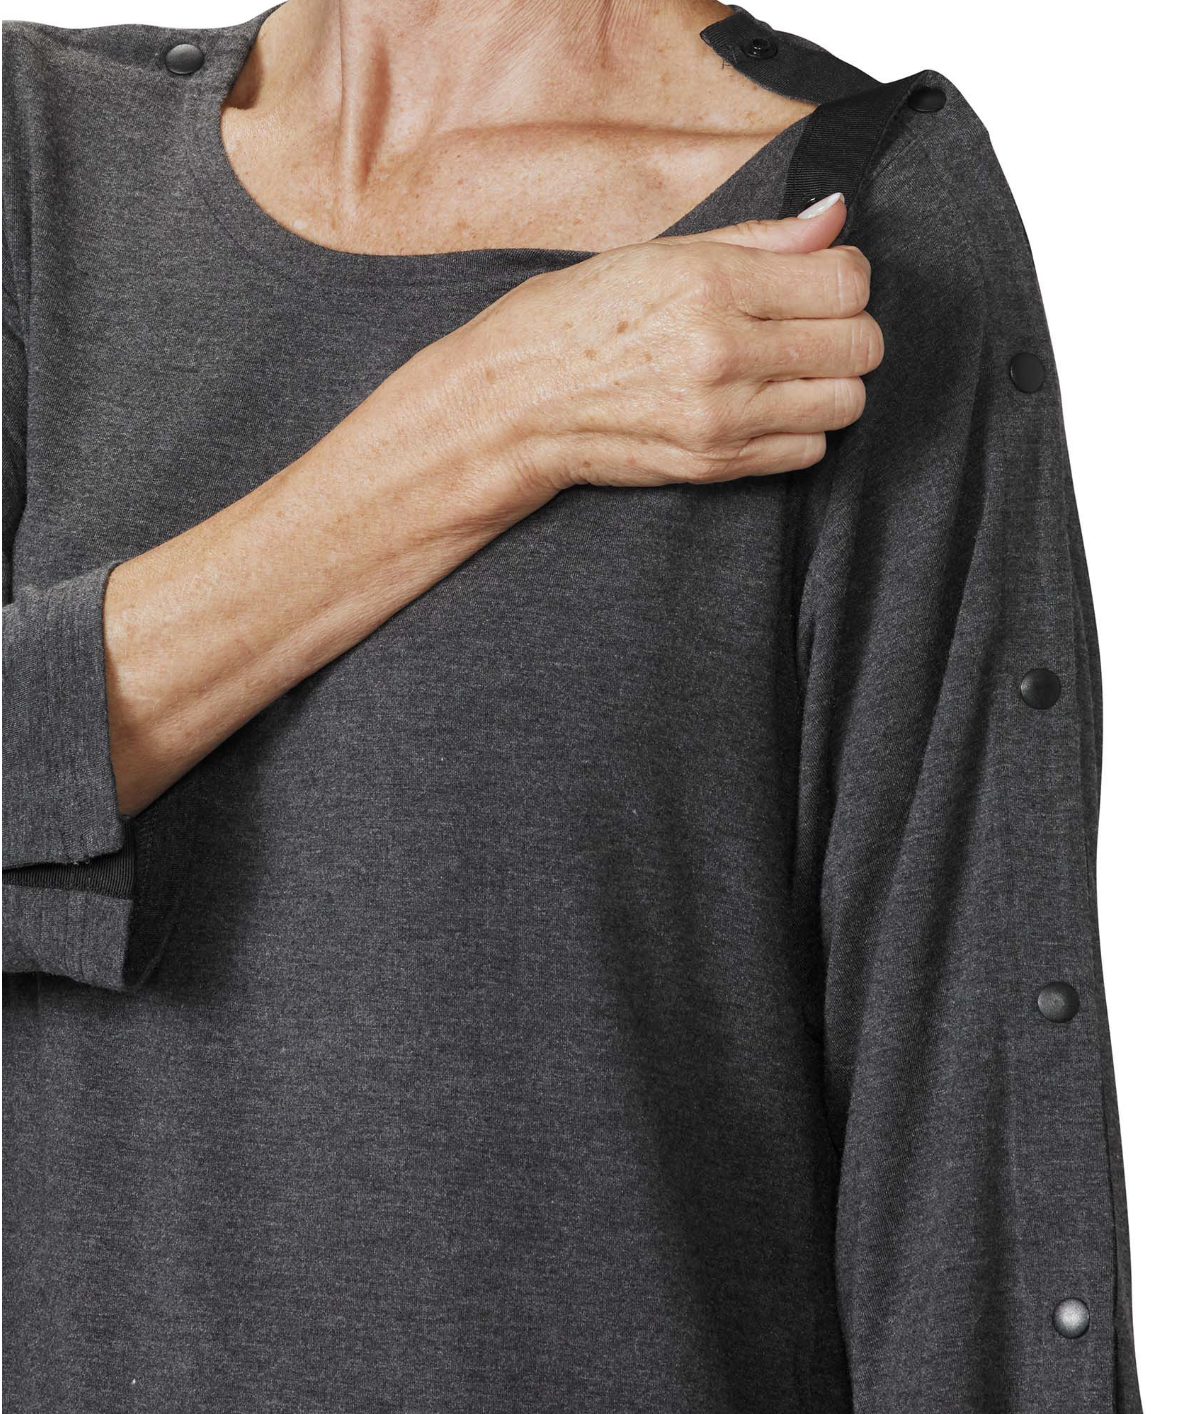 Post Surgery Clothing Top With Snaps | Art in Aging